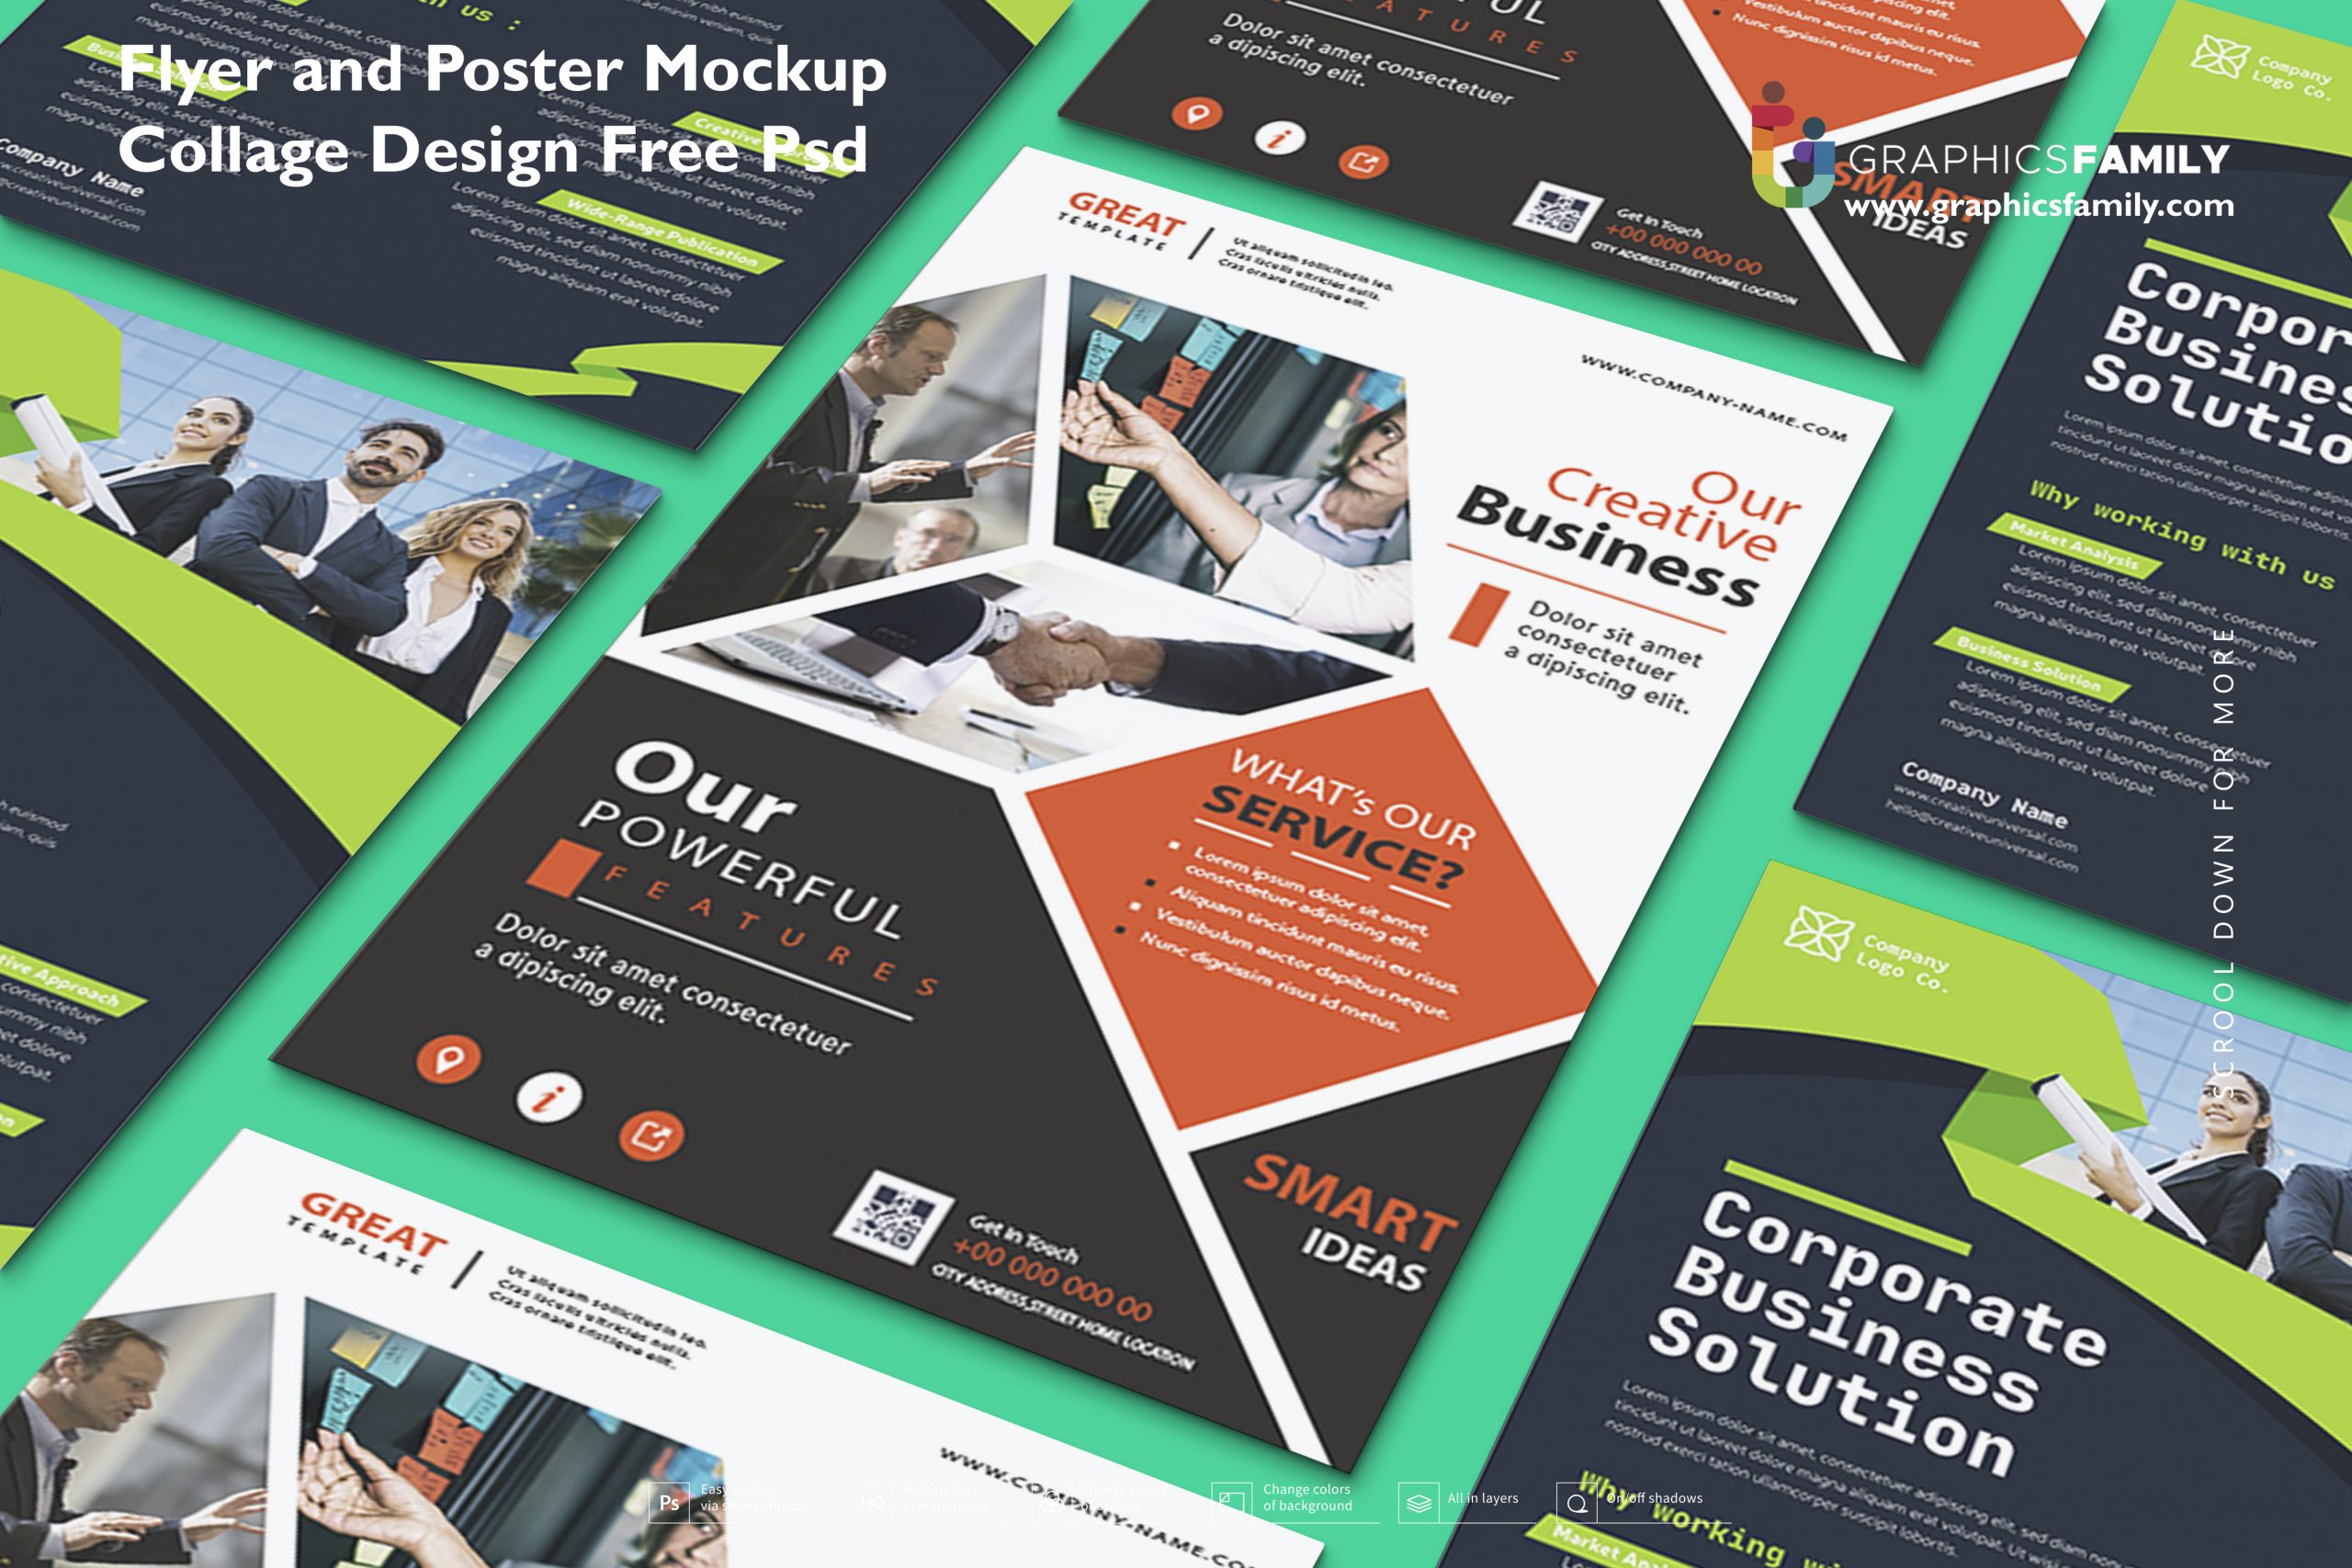 Flyer and Poster Mockup Collage Design Free Psd